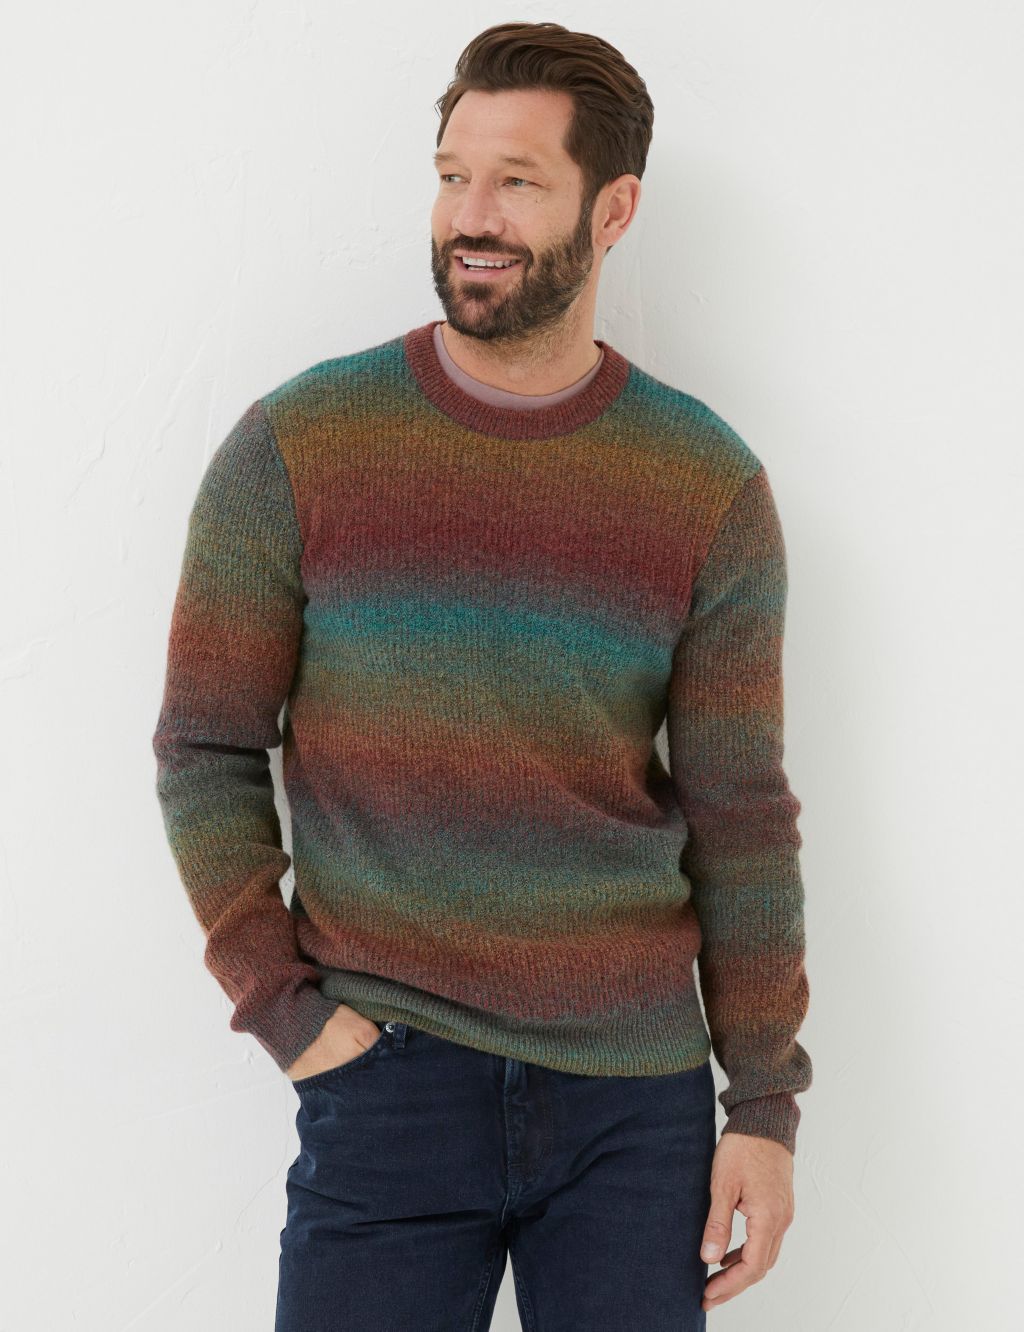 Striped Ribbed Crew Neck Jumper with Wool image 1